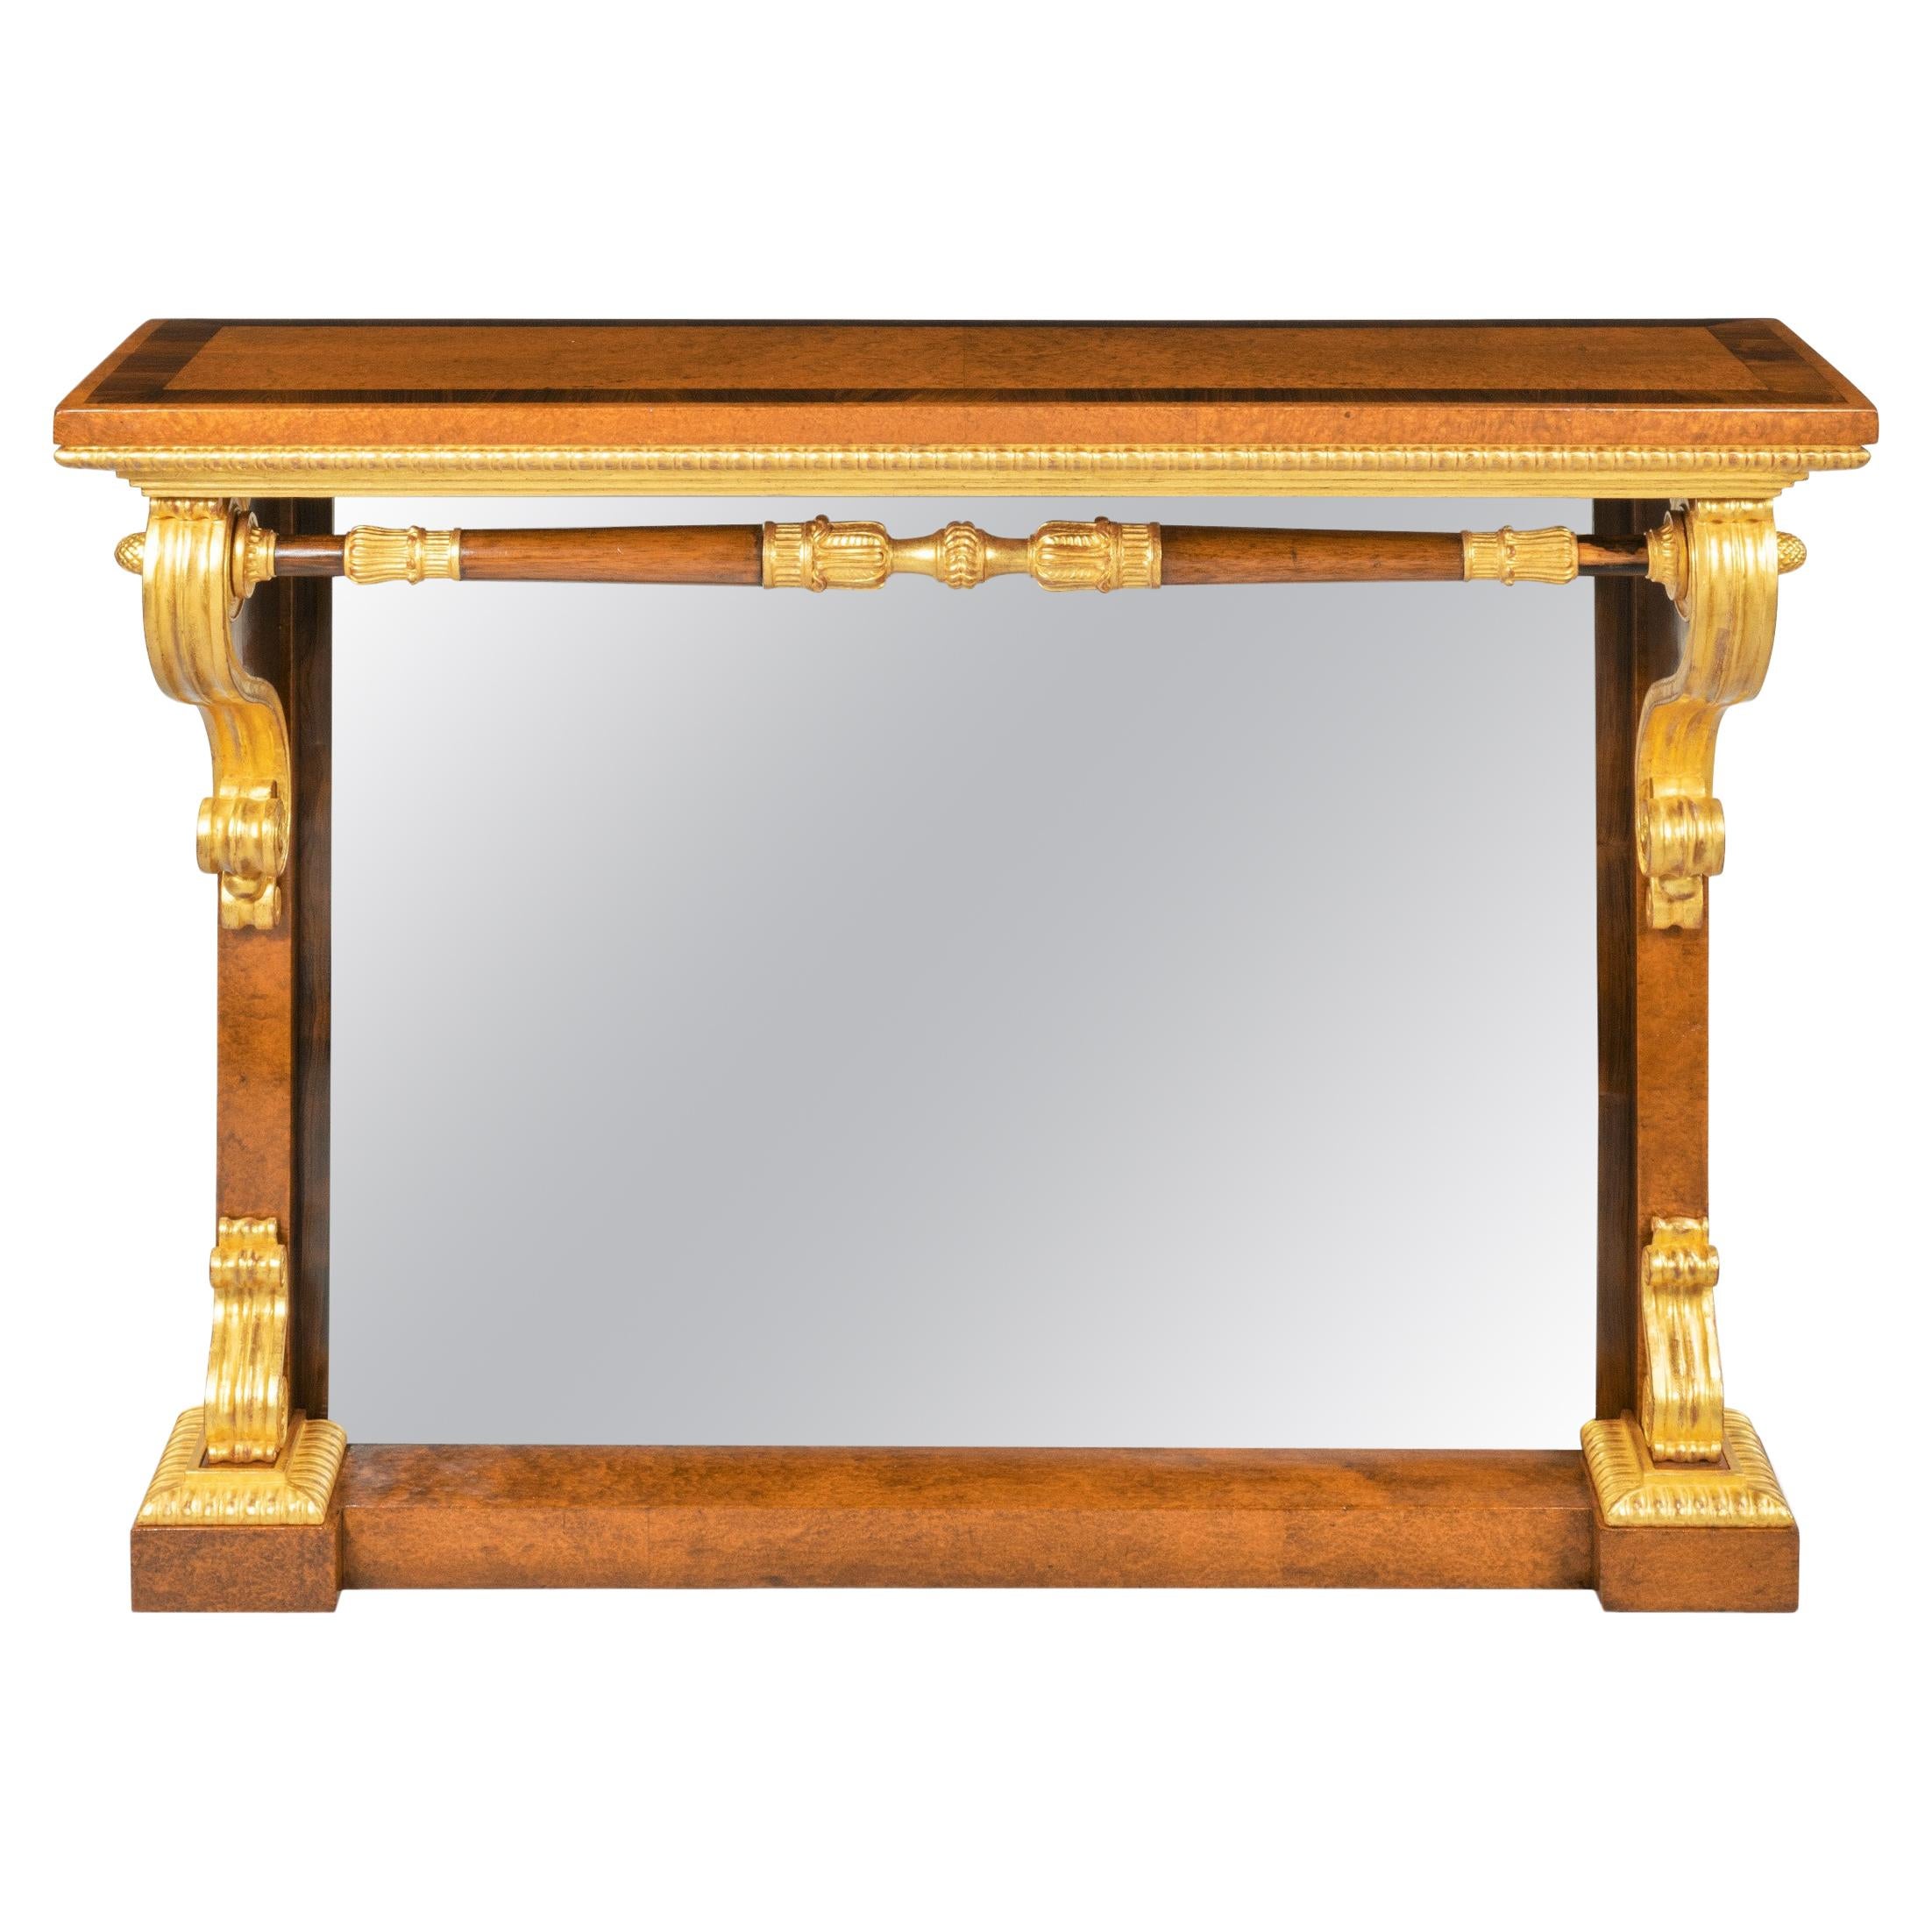 Striking George IV Amboyna, Rosewood and Gilt Console Table For Sale